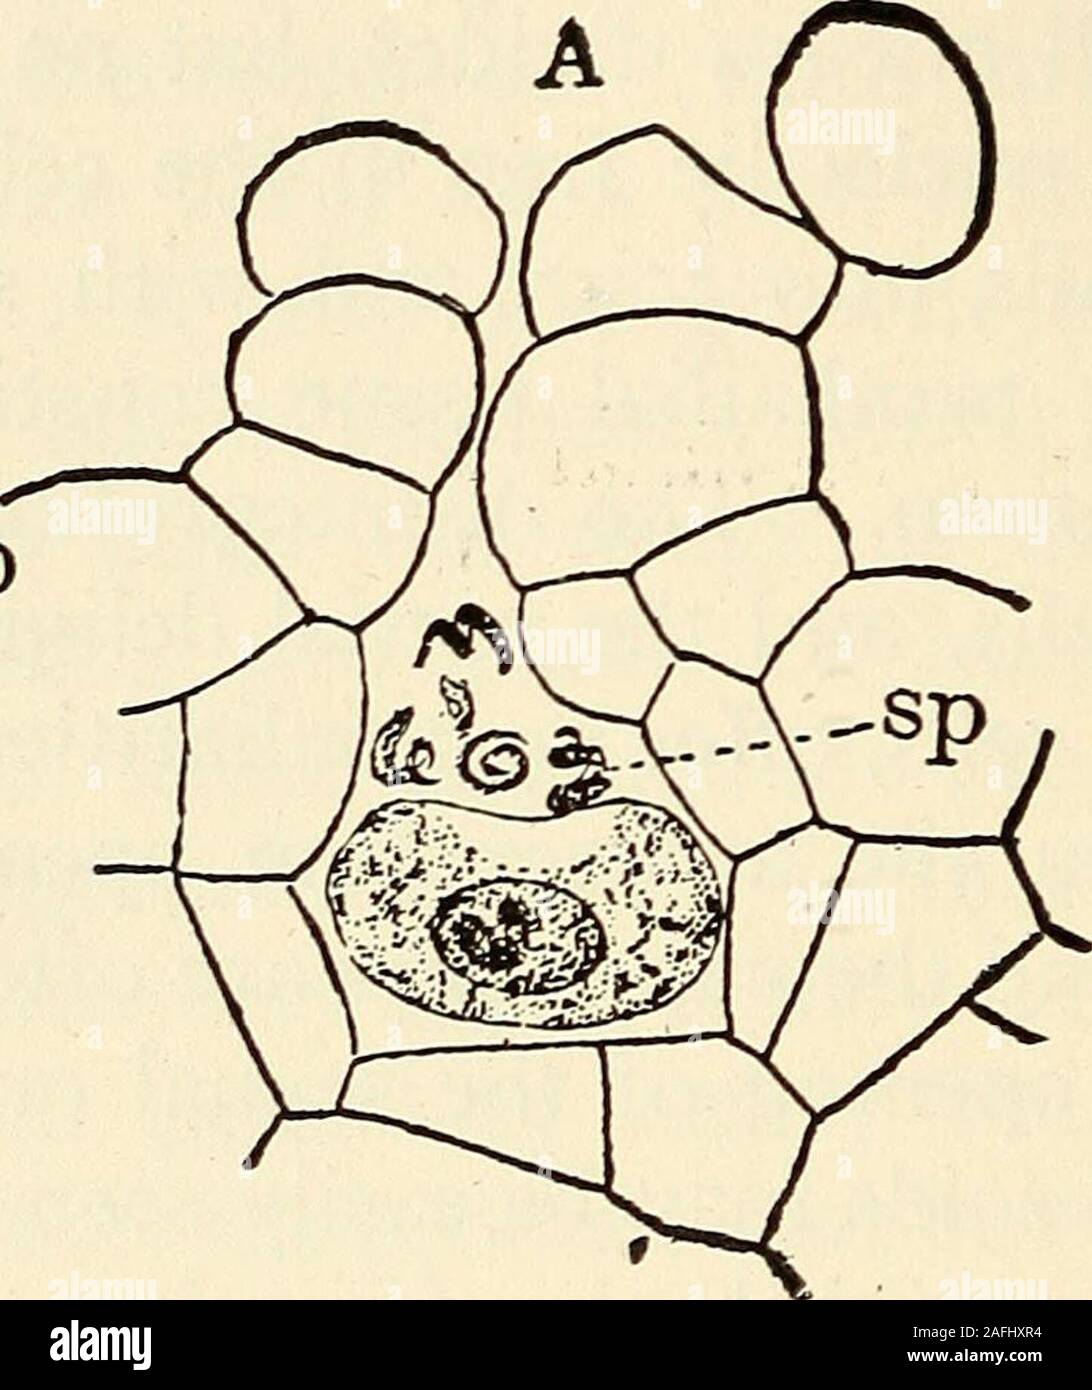 . The structure and development of mosses and ferns (Archegoniatae). --sp. Fig. 177.—A, Osmunda cinnamomea, section of a recently fertilised archegonium,X4S0. A spermatozoid has penetrated the nucleus of the egg, and several arein the space above the egg. B, Onoclea sensibilis. Egg fourteen hours after thepenetration of the spermatozoid, which is still recognizable within the egg nucleus,X900. (B, after Shaw.) gonium opens, the egg is depressed above, and the nucleusflattened. As soon as the archegonium opens, and the dis-organised contents of the neck cells are expelled, the tggbecomes turgid Stock Photo